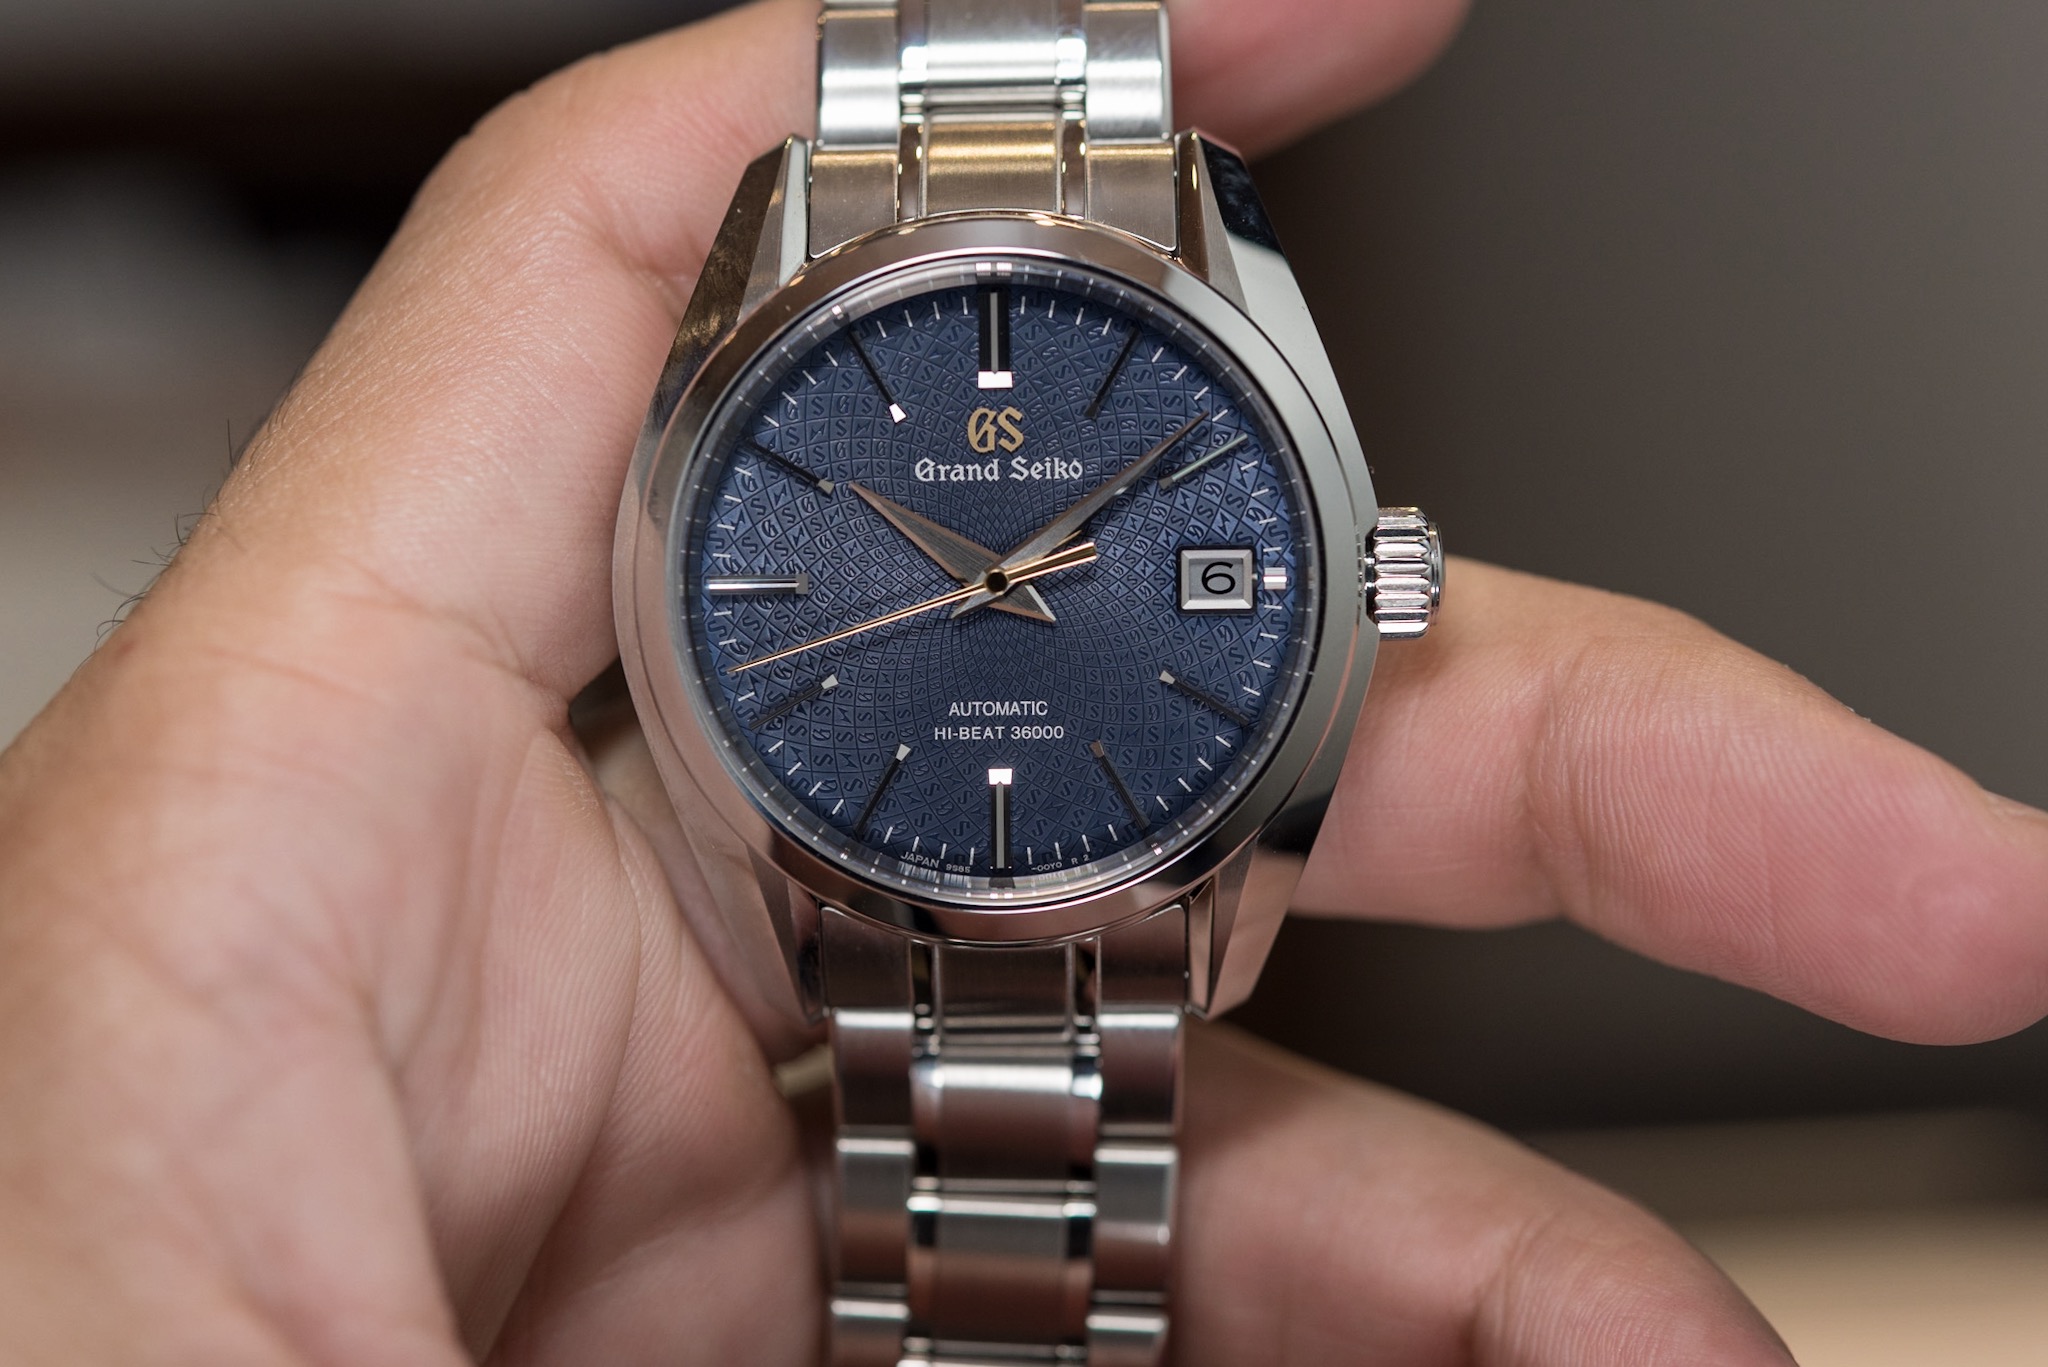 Stainless steel model with blue dial